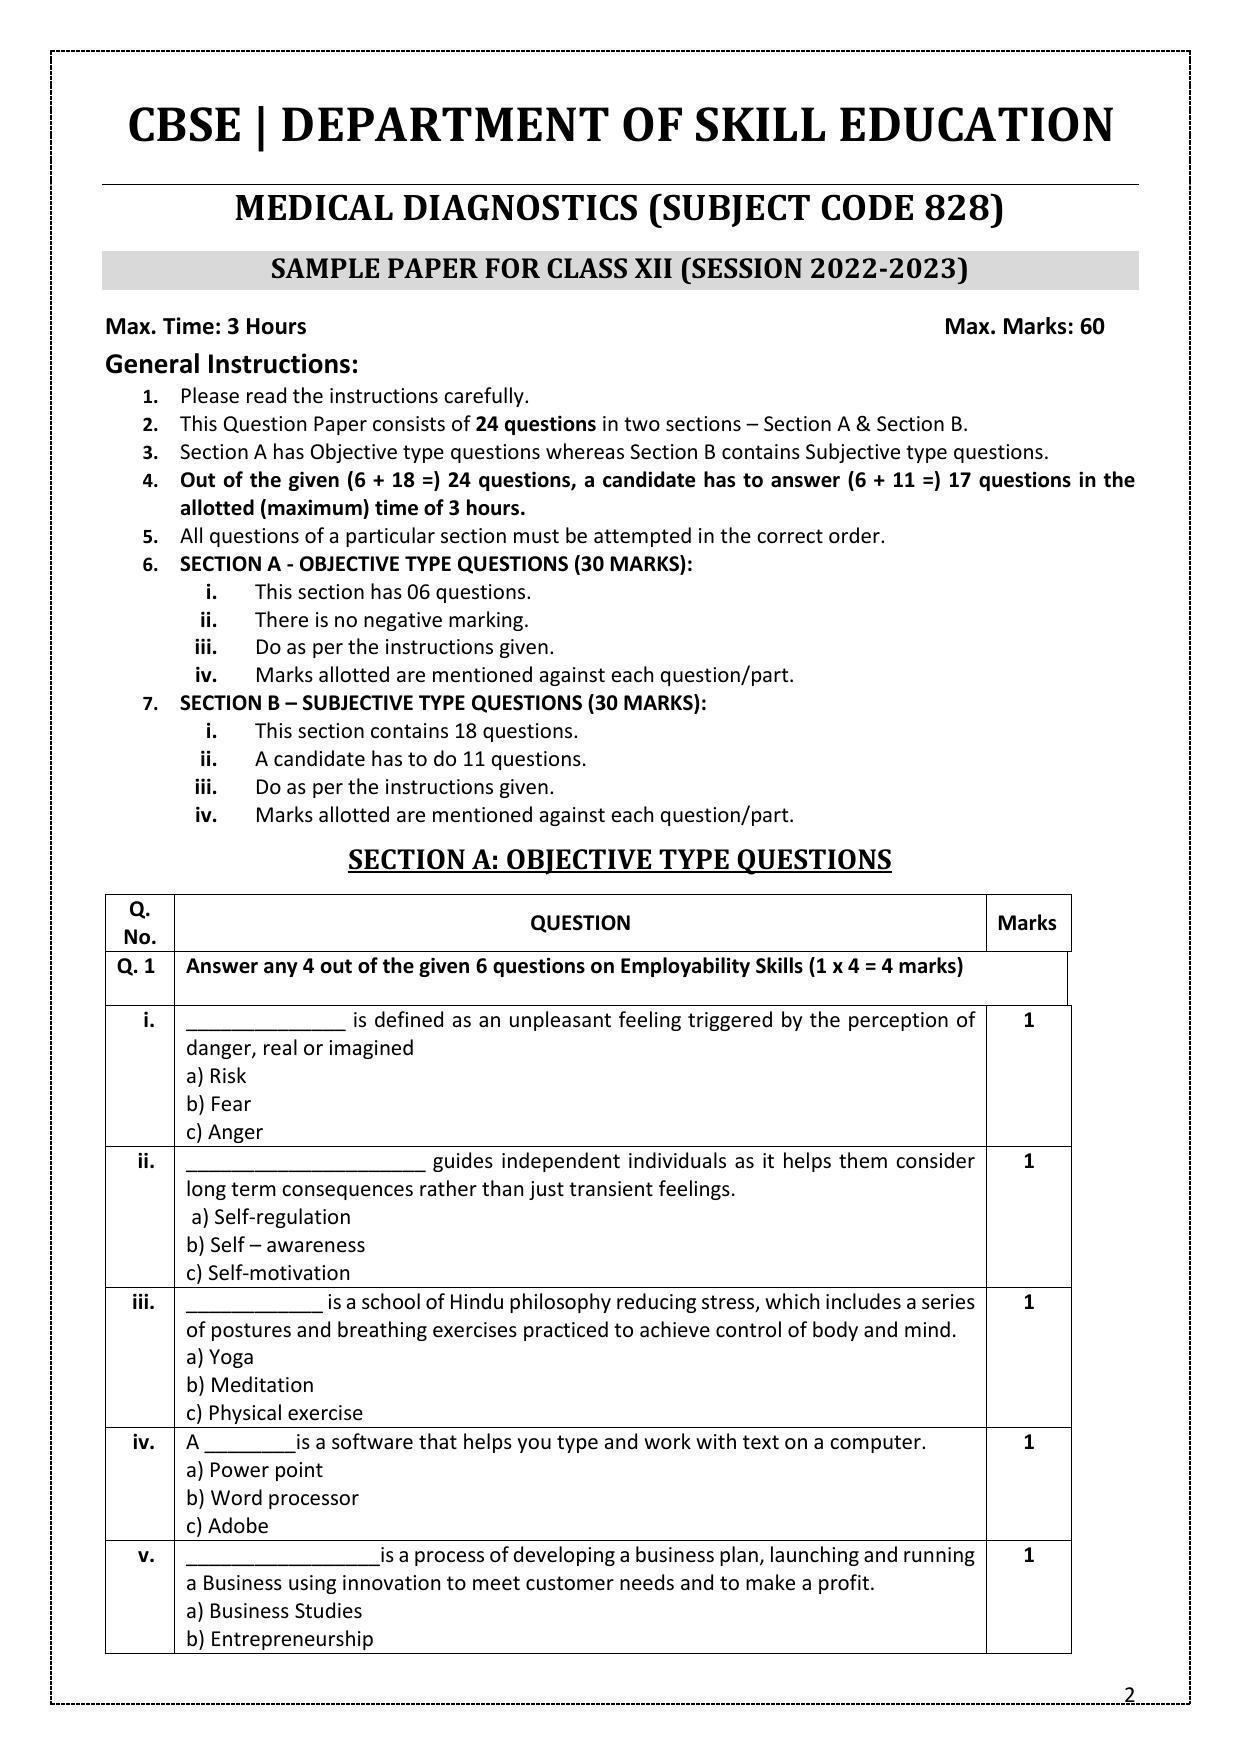 CBSE Class 12 Medical Diagnostics (Skill Education) Sample Papers 2023 - Page 2